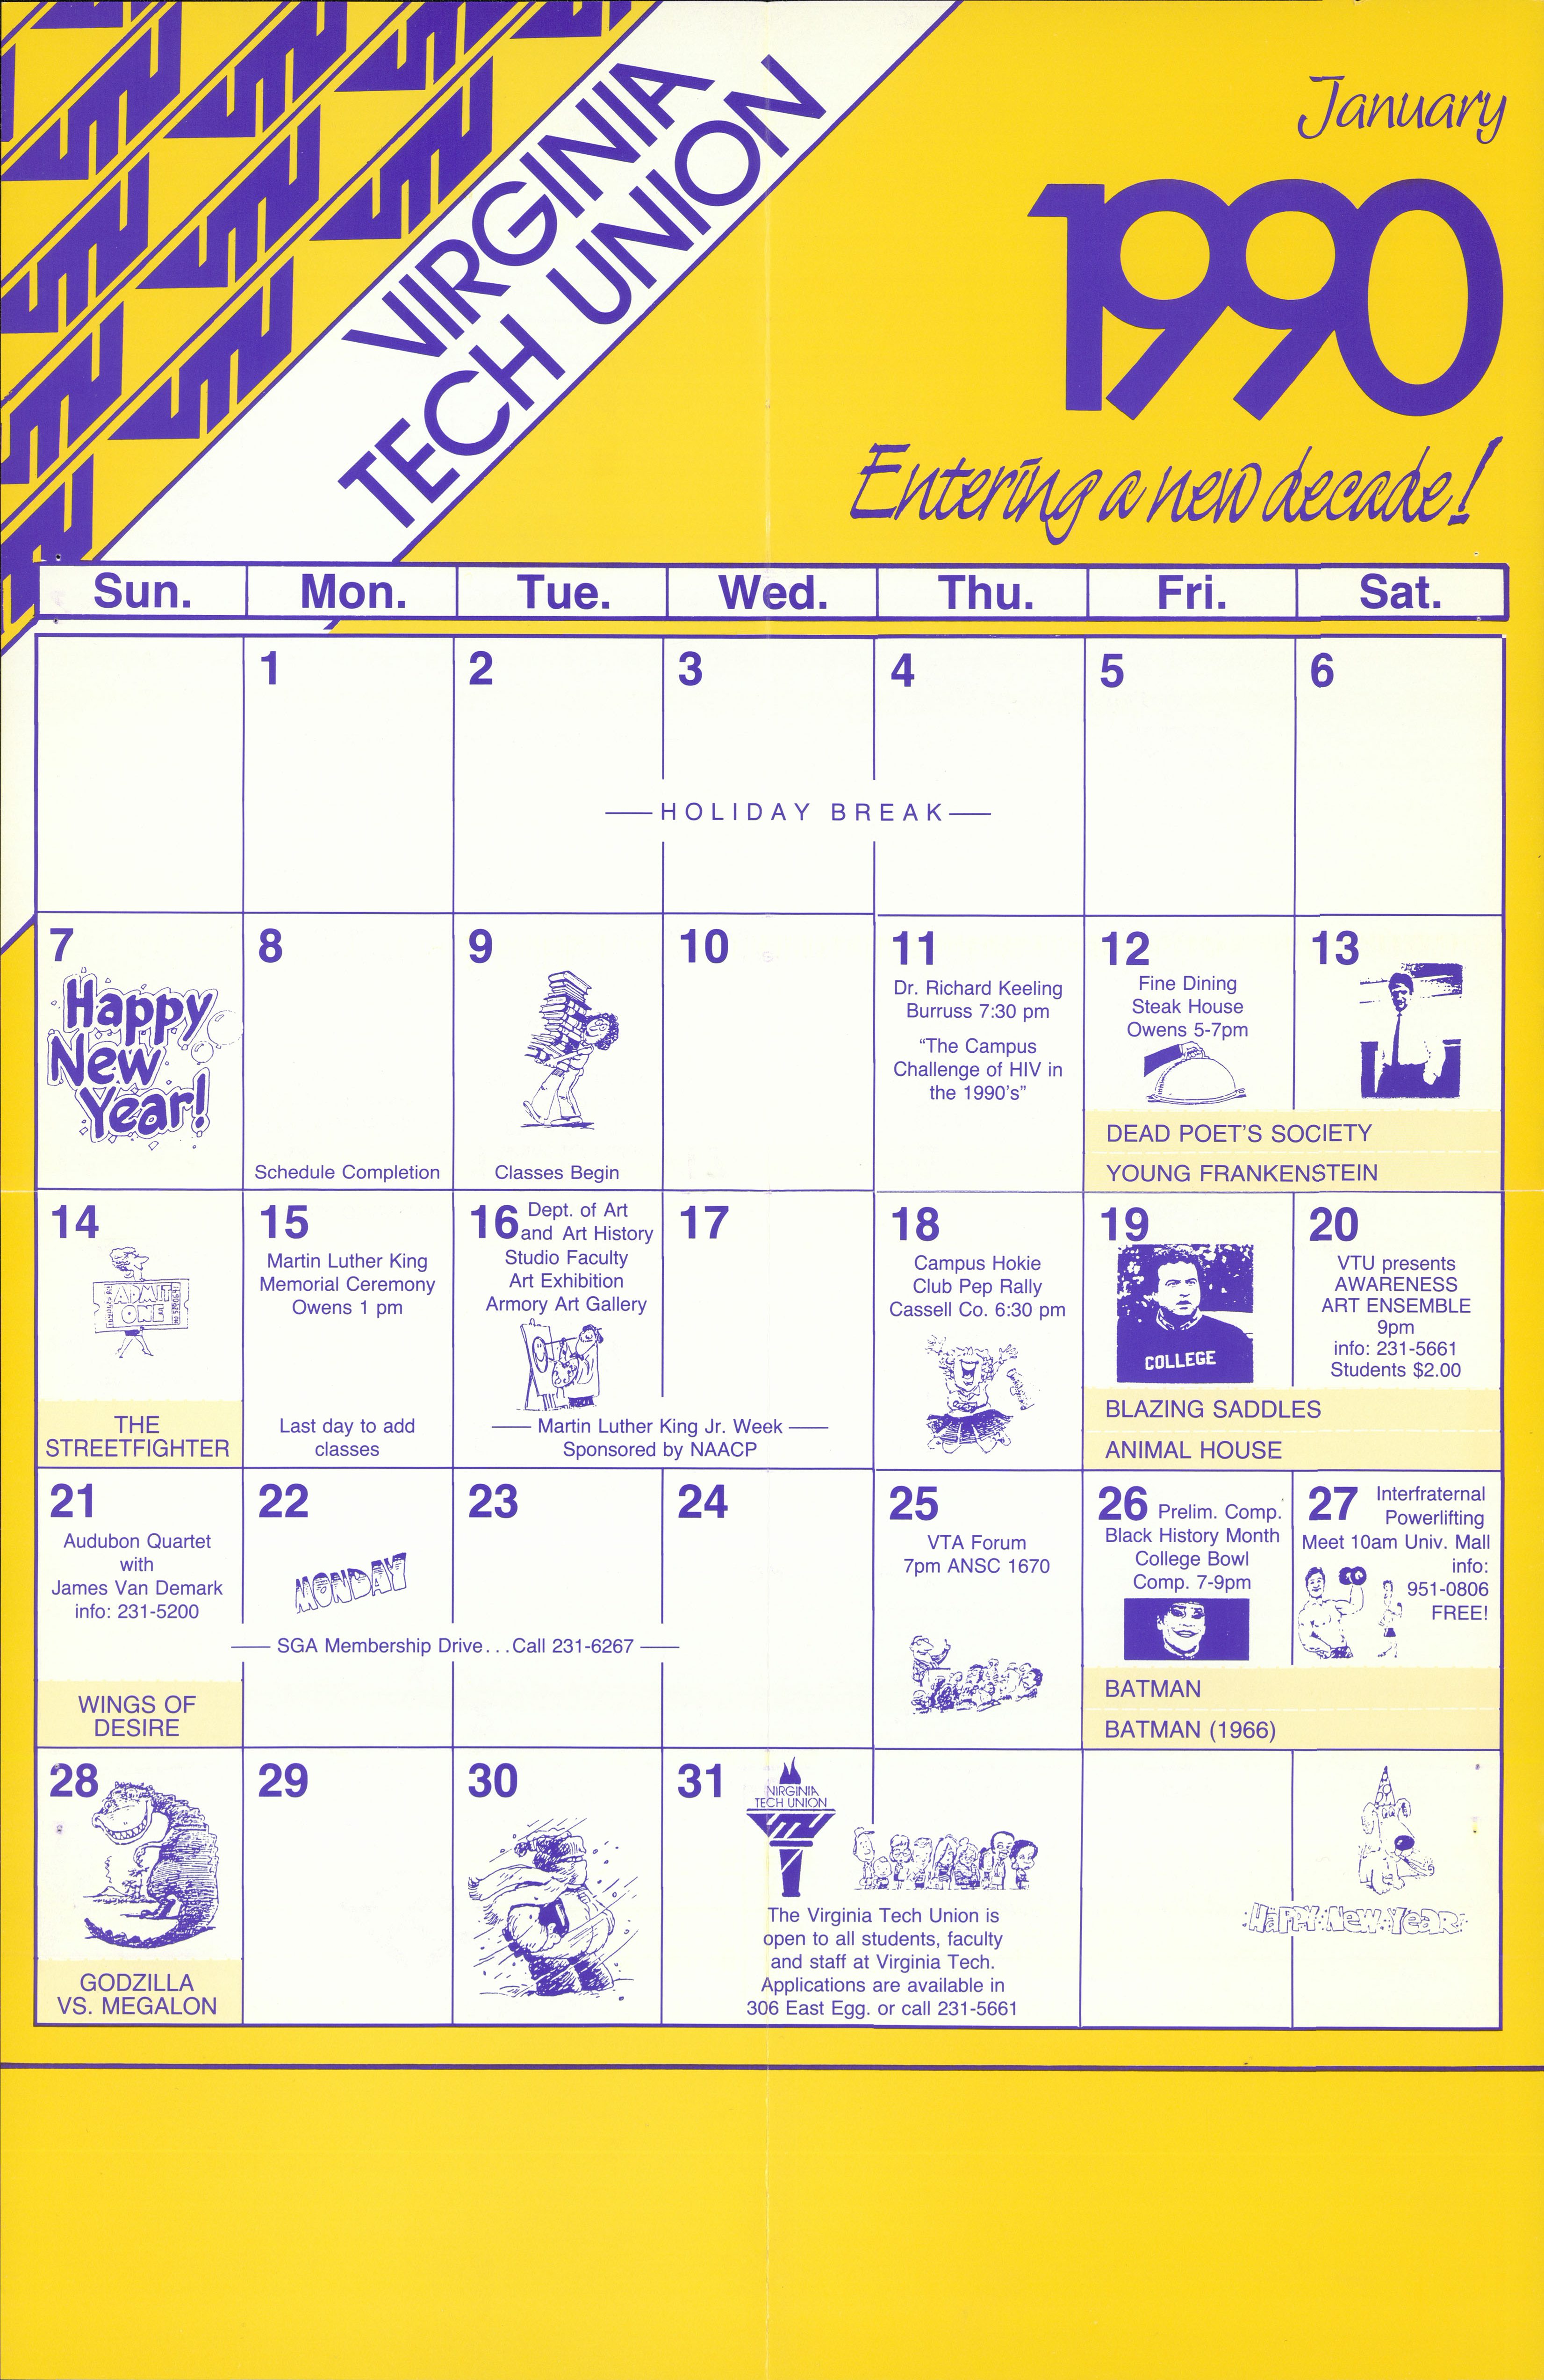 Virginia Tech Union Calendar January 1990 Virginia Tech Special Collections And University Archives